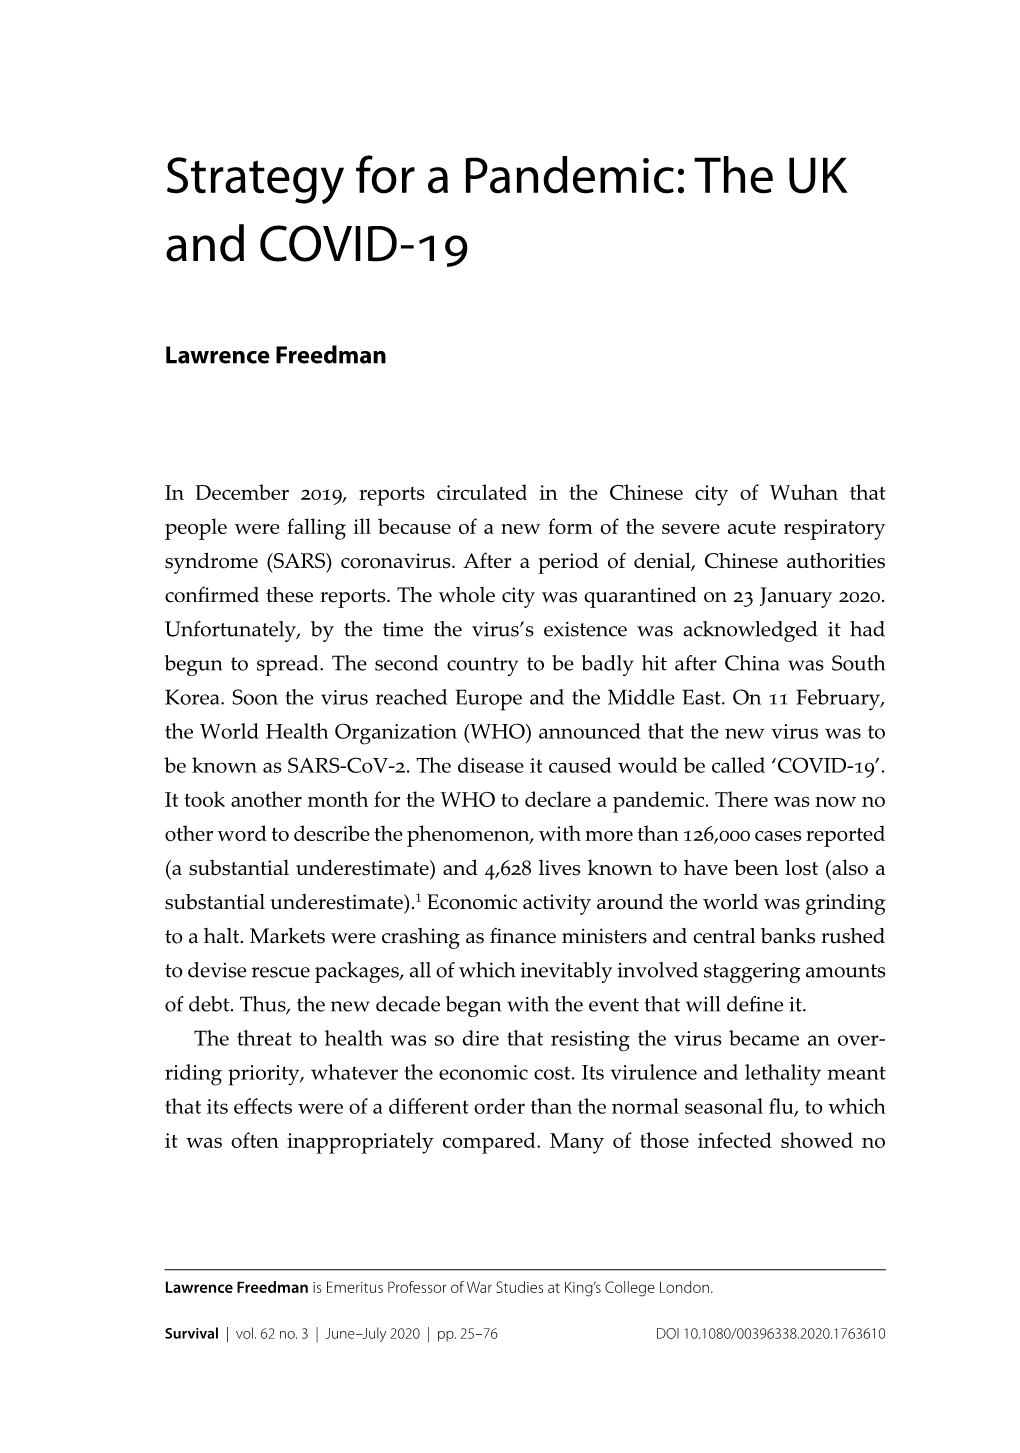 Strategy for a Pandemic: the UK and COVID-19